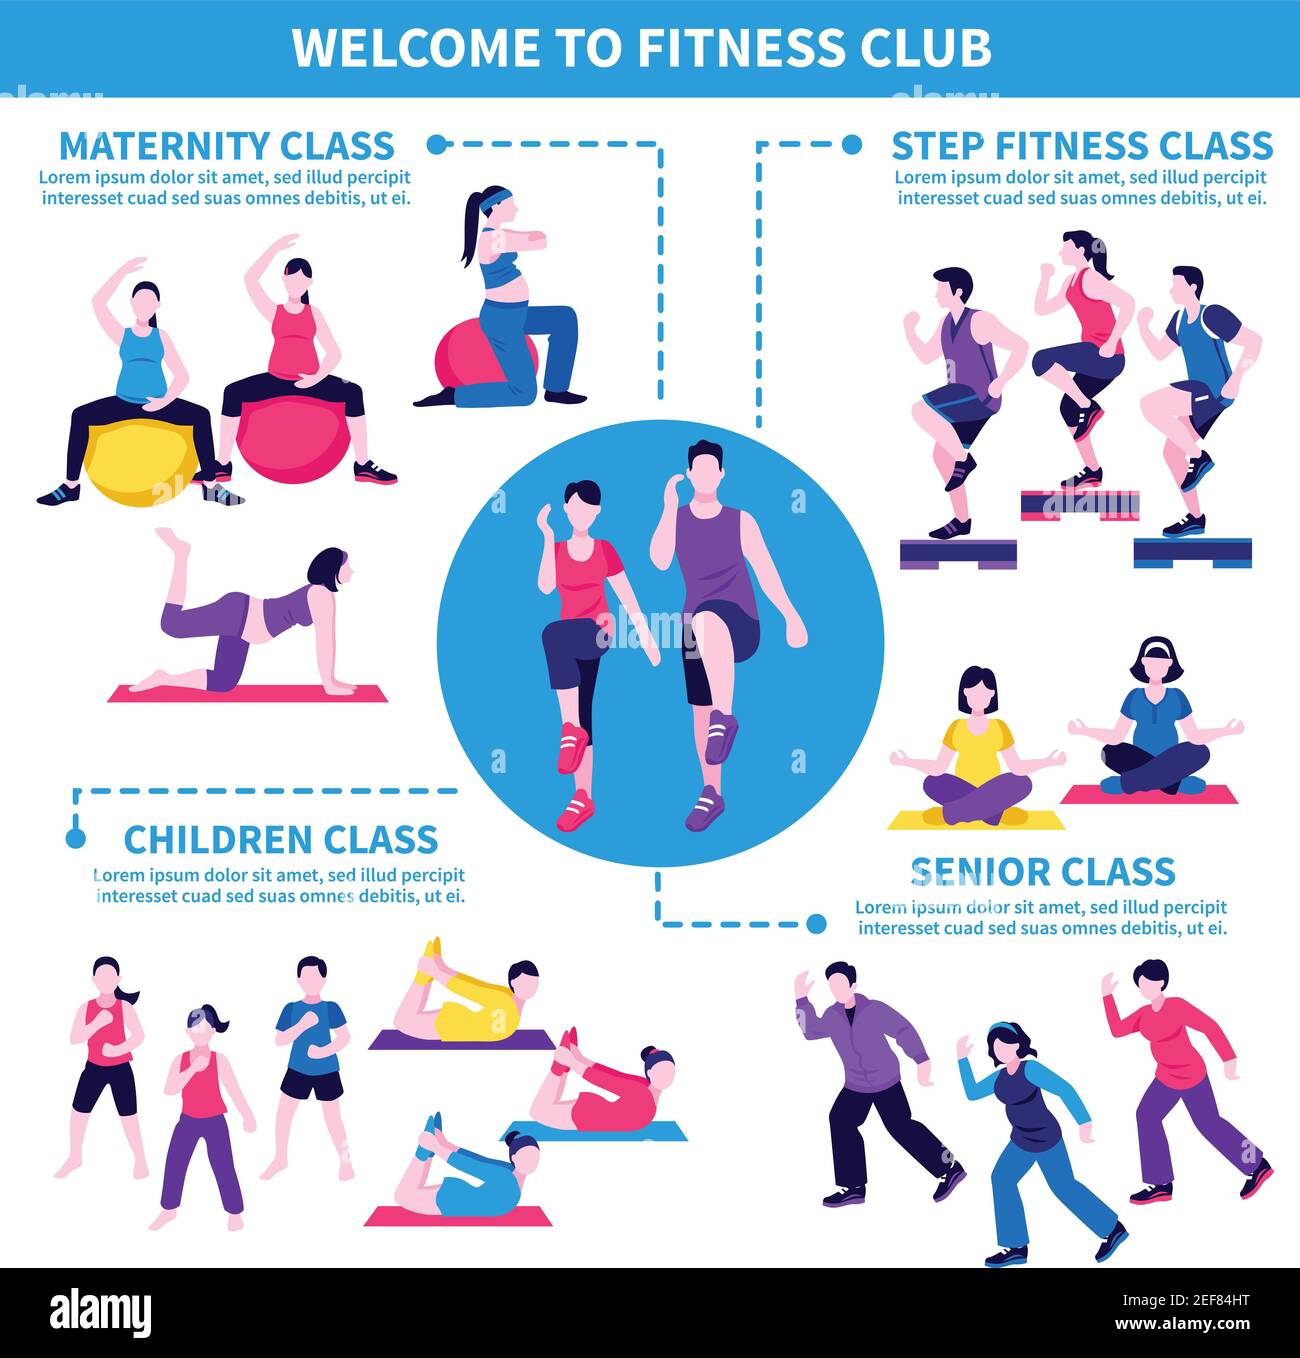 Fitness aerobic club infographic poster with senior maternity and children classes offer flat advertisement poster vector illustration Stock Vector